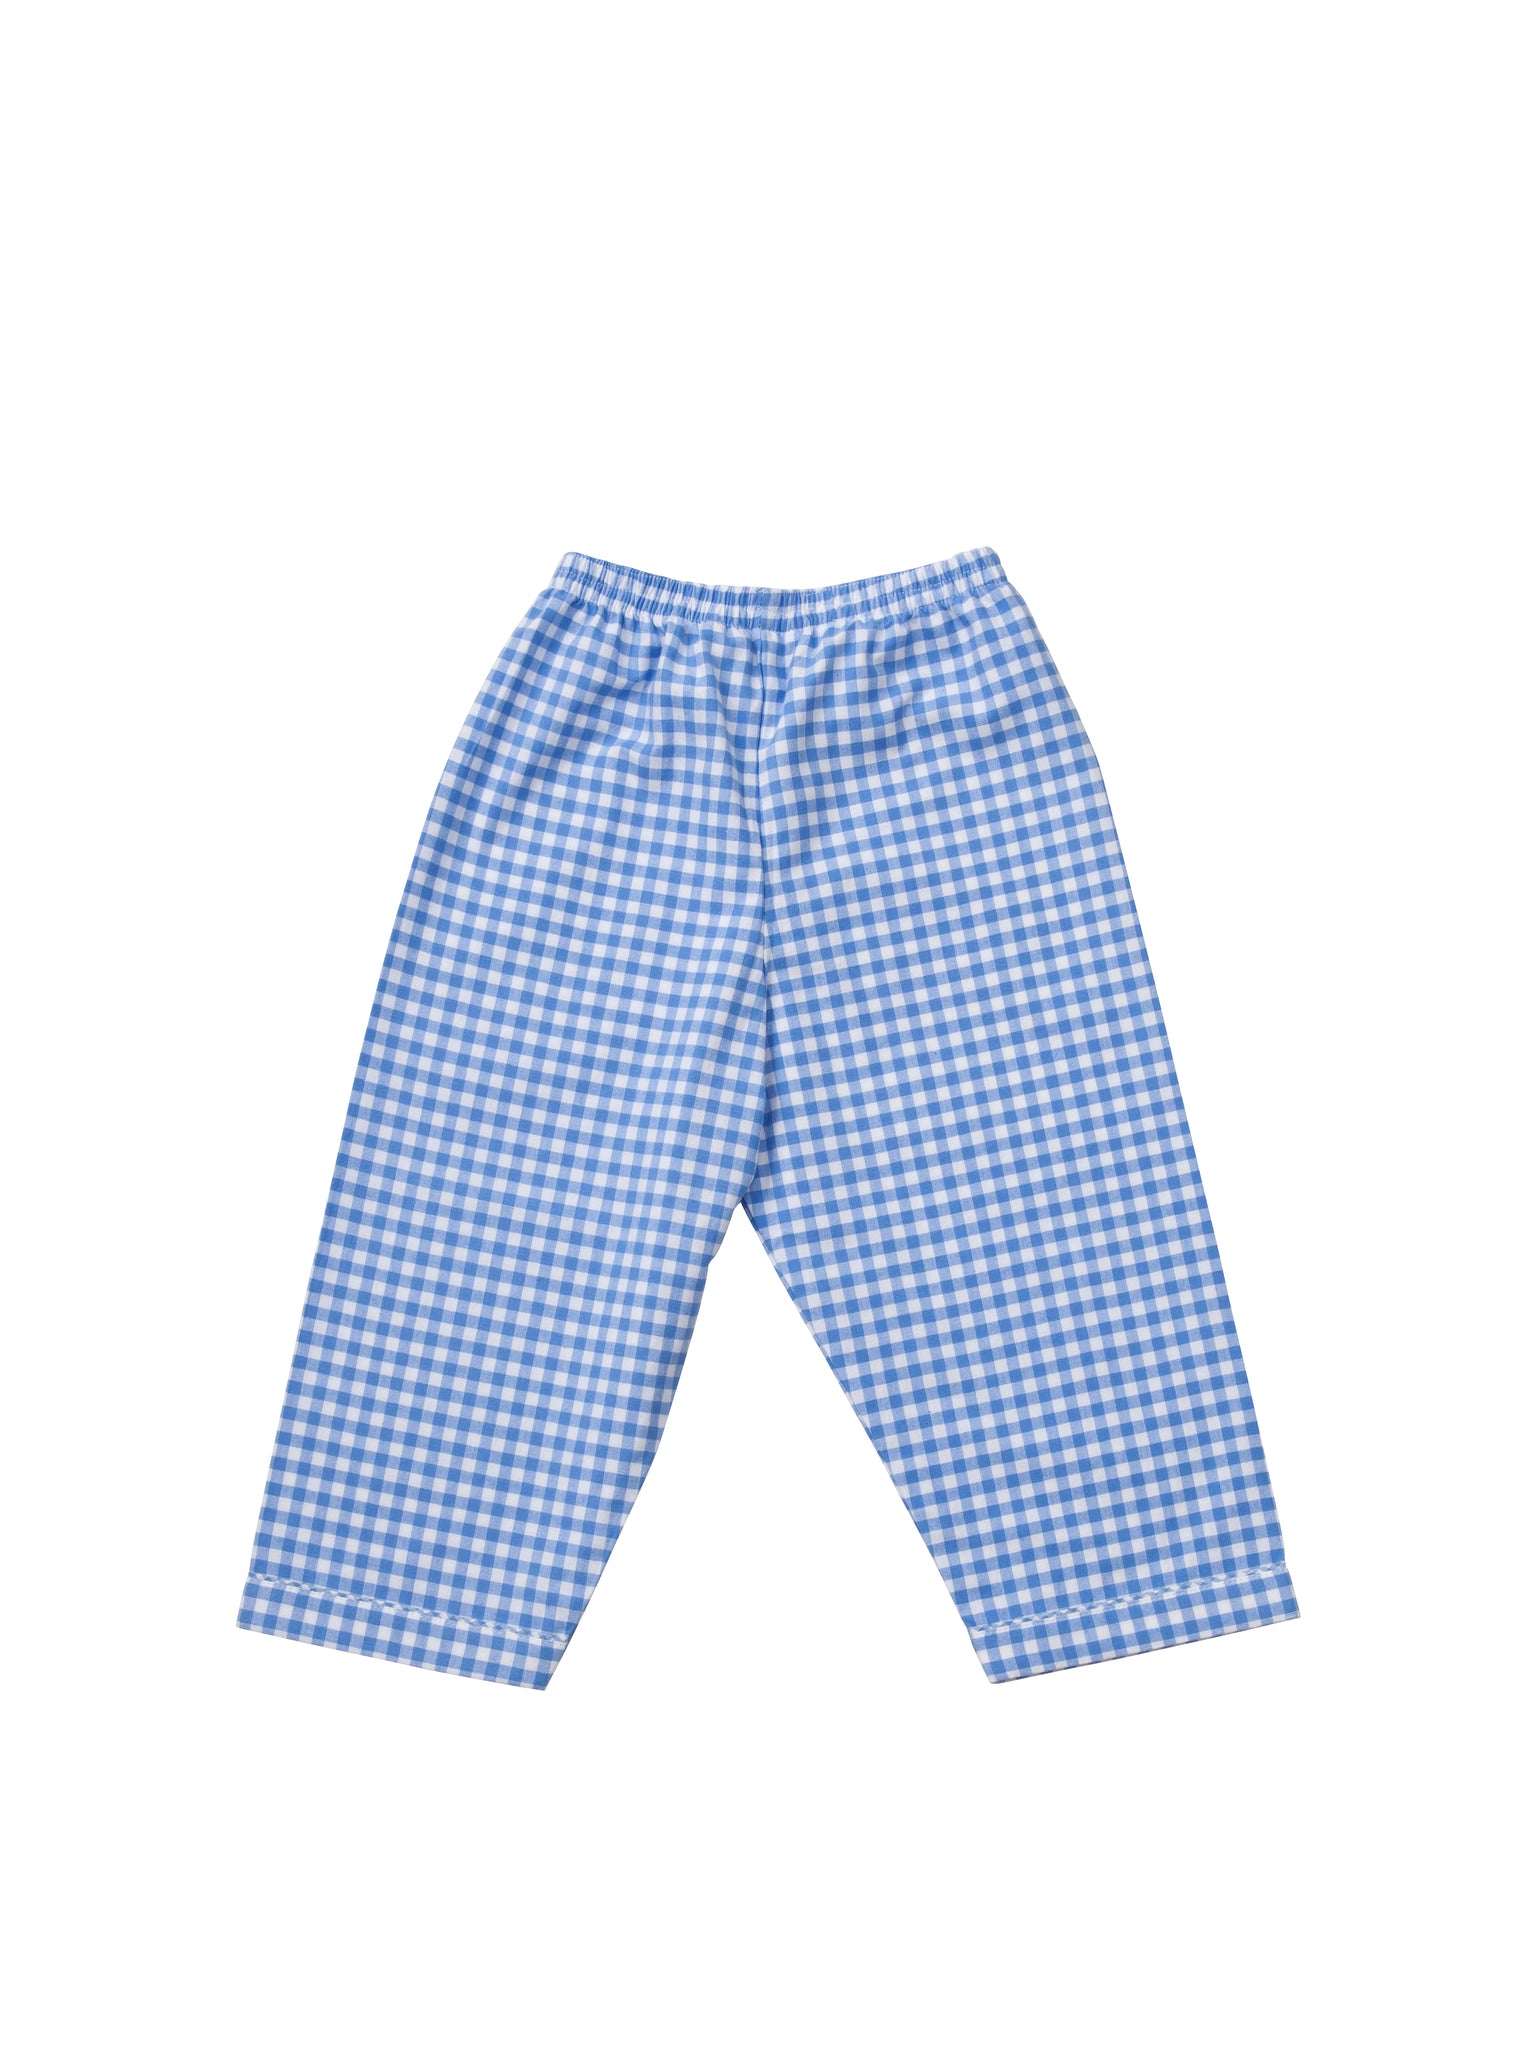 Classic red gingham children's cotton pyjamas with car motif. Bottoms. From Turquaz. 